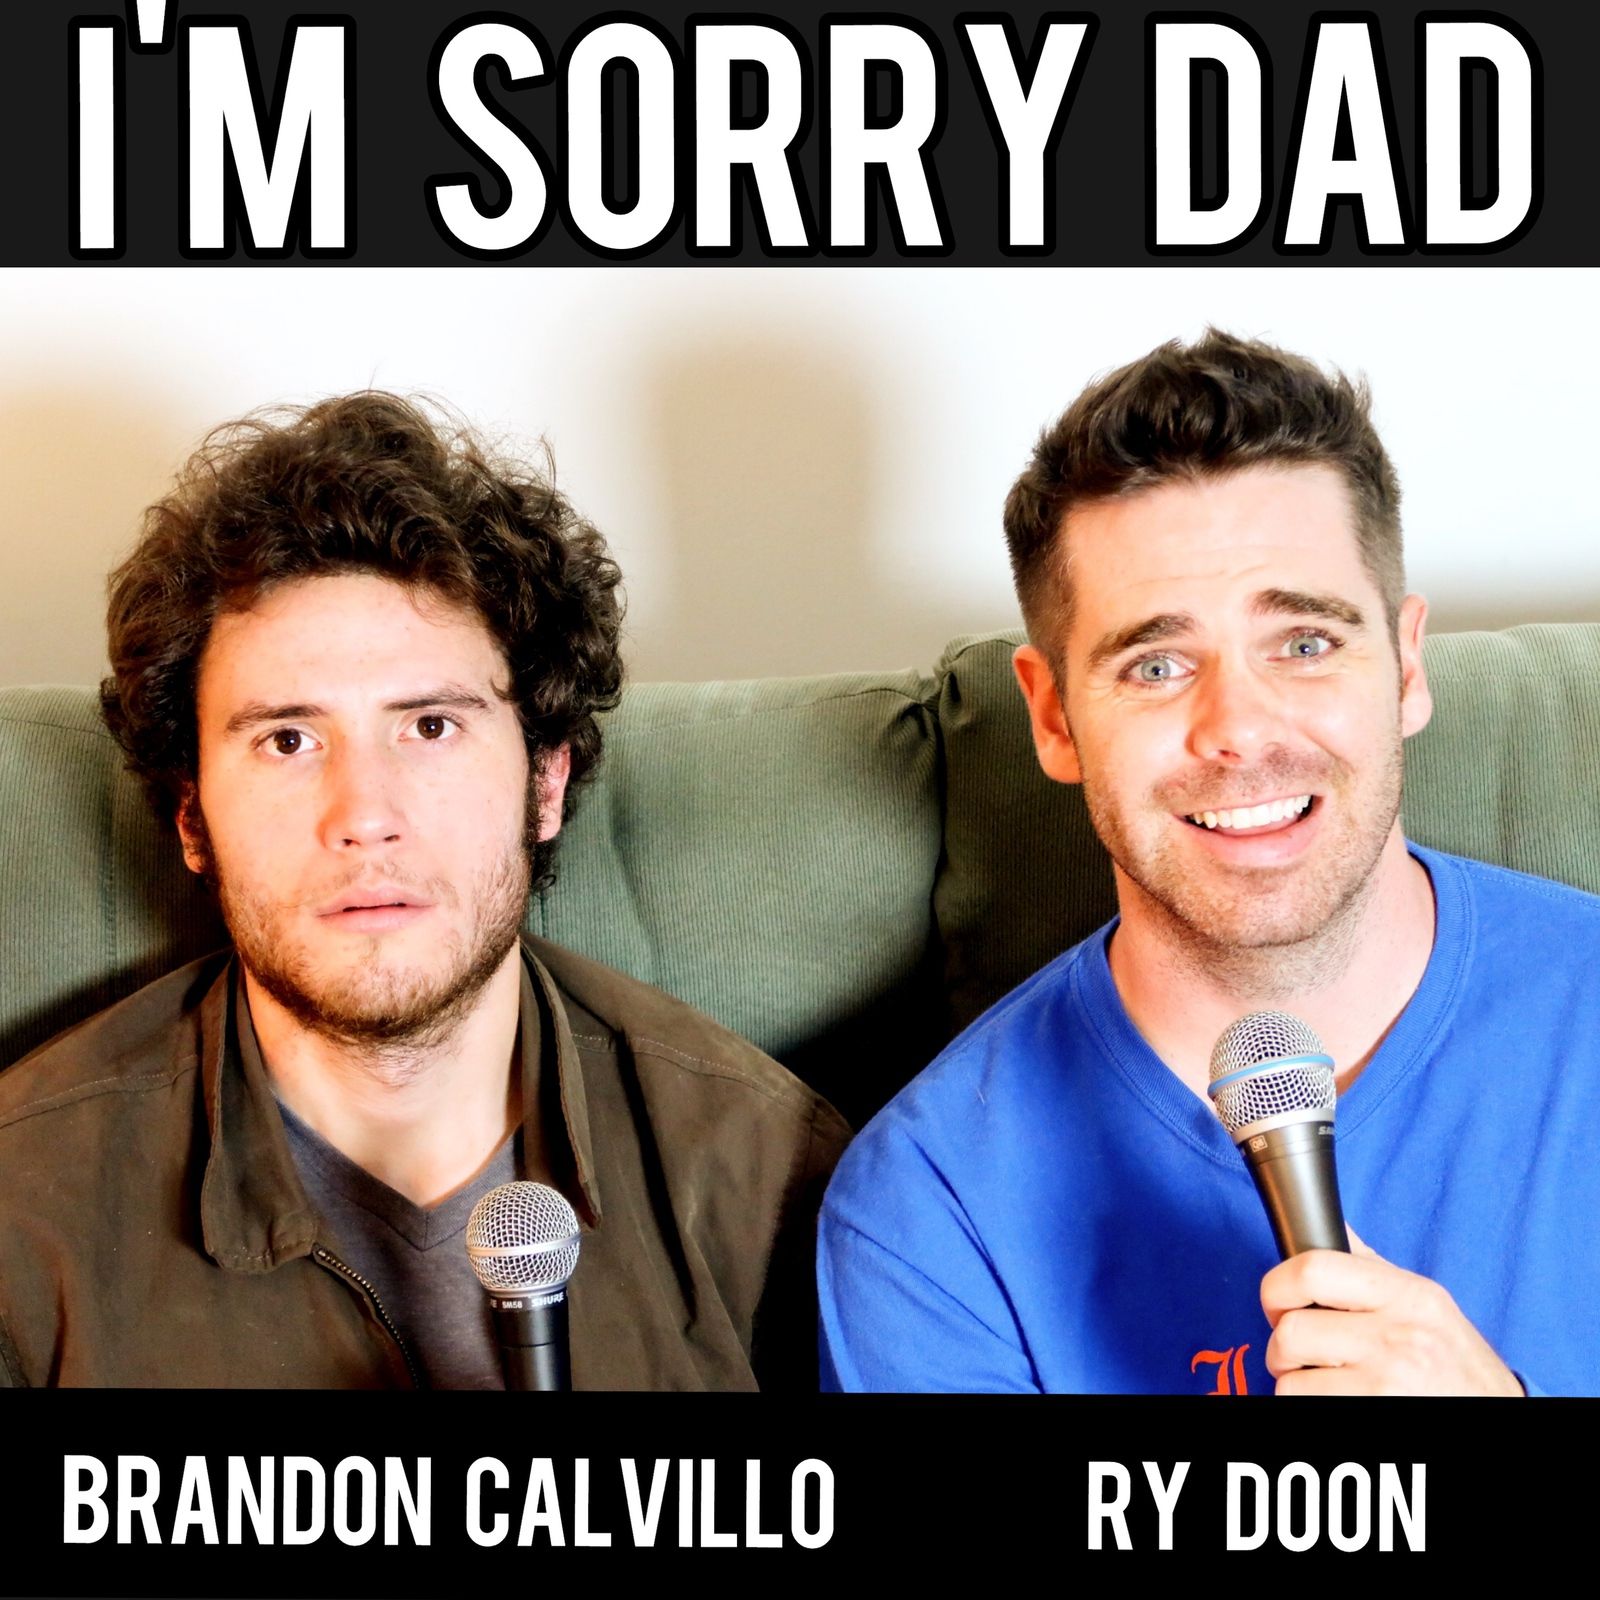 I’m Sorry Dad introduction mini-episode!